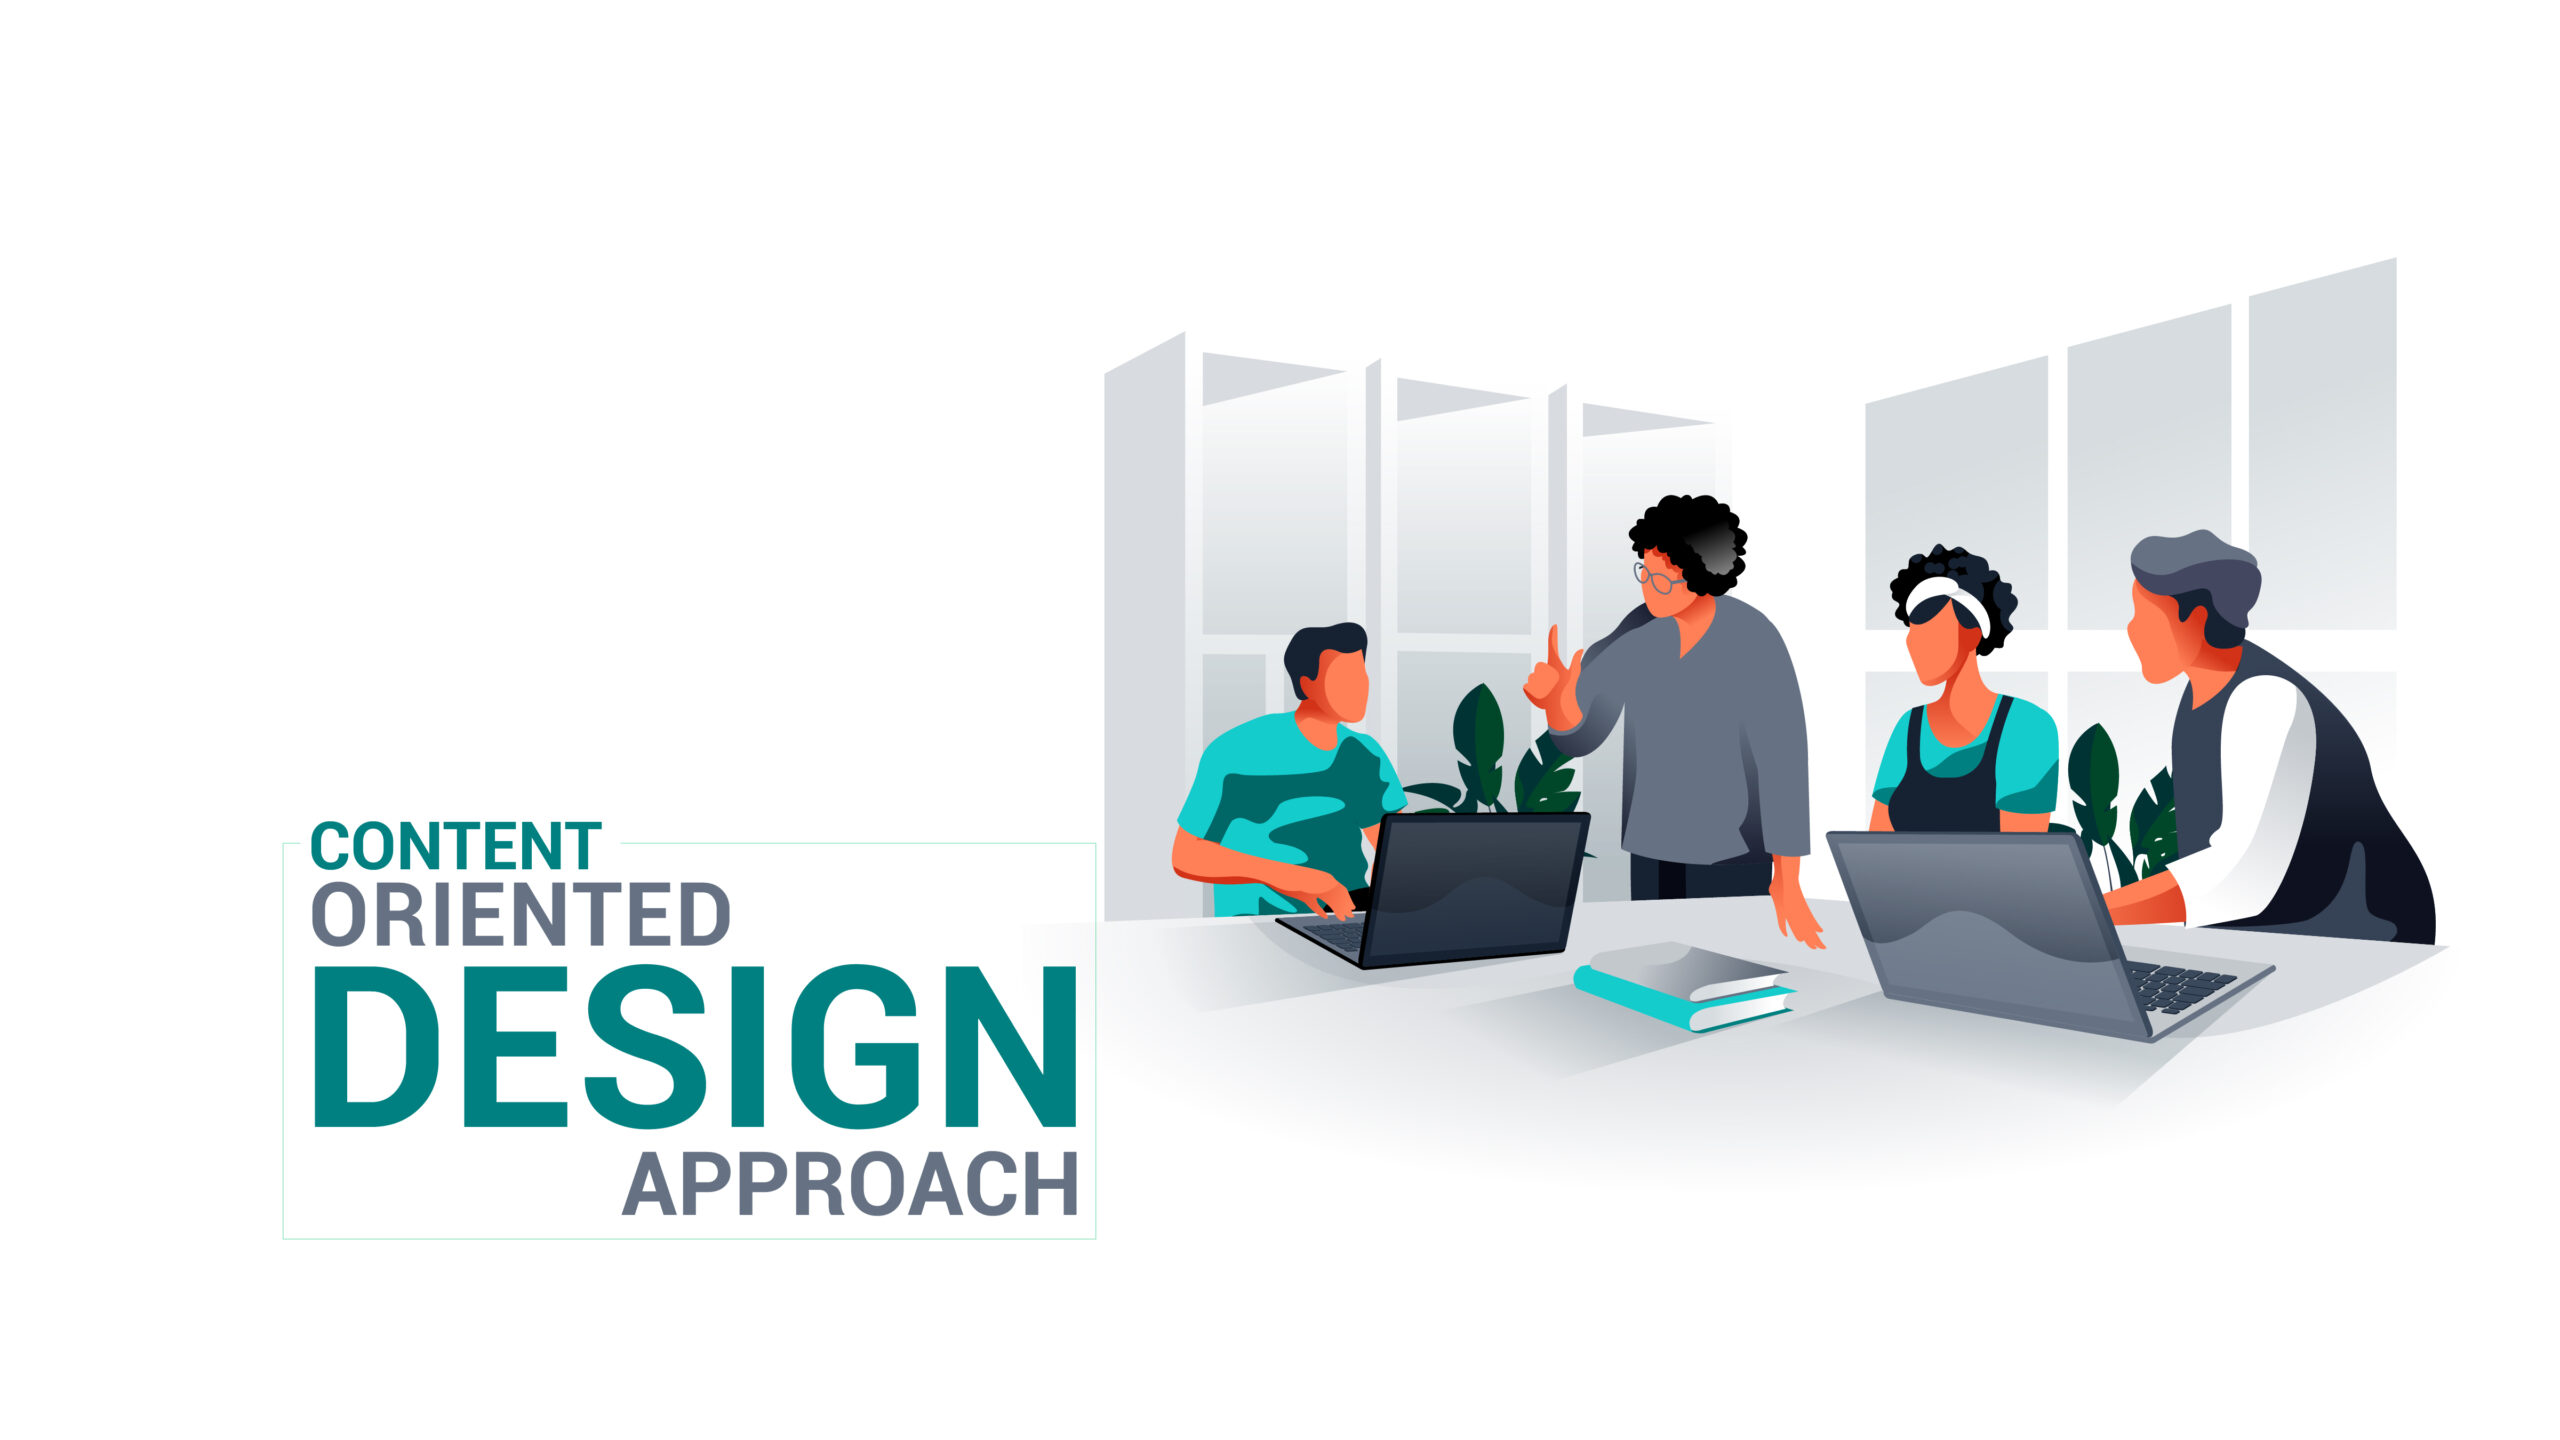 Content oriented design approach graphicrevamp